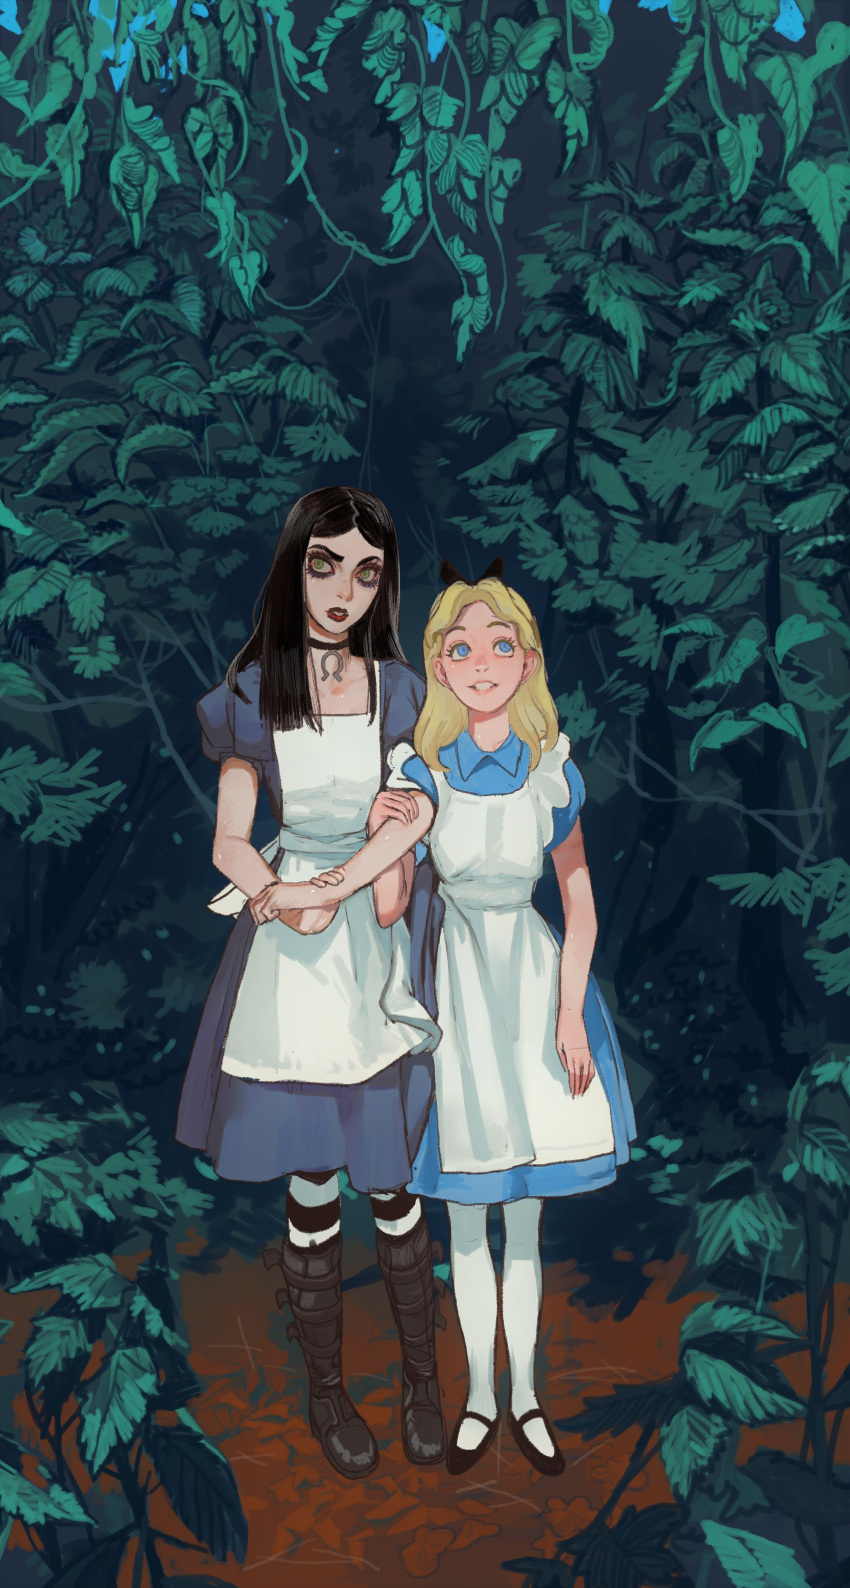 2girls absurdres alice_(alice_in_wonderland) alice_in_wonderland alice_liddell american_mcgee's_alice apron black_bow black_eyeshadow black_footwear black_hair blonde_hair blue_dress blue_eyes boots bow dress eyeshadow green_eyes hair_bow highres jewelry locked_arms makeup mary_janes mossacannibalis multiple_girls necklace open_mouth plant puffy_sleeves red_lips shoes short_sleeves standing striped striped_legwear white_apron white_legwear